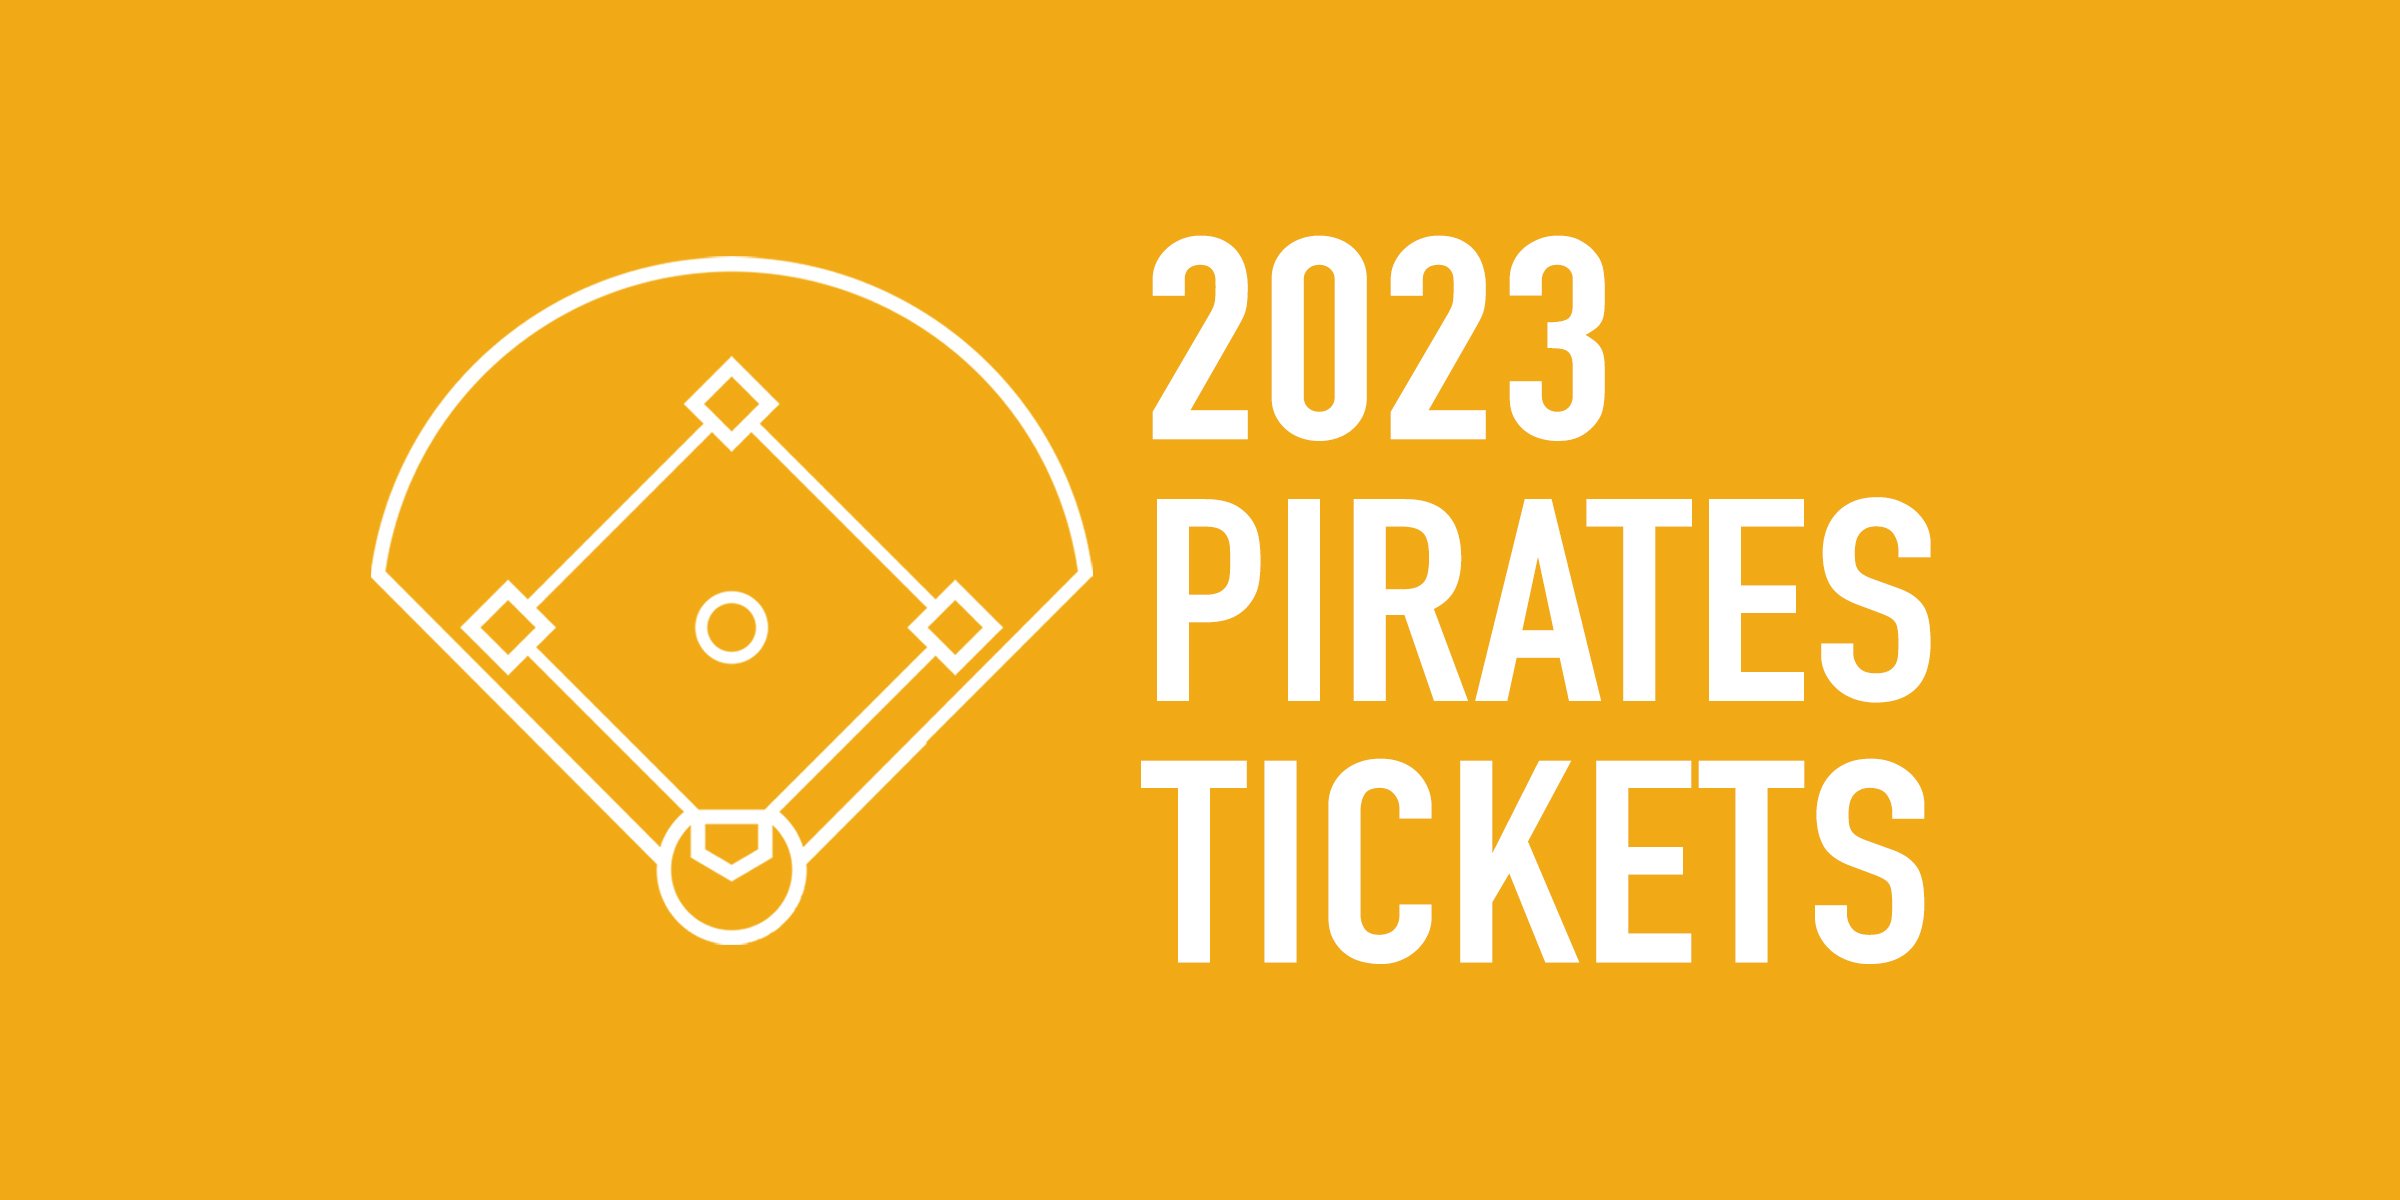 Best place to buy pirates tickets? : r/buccos